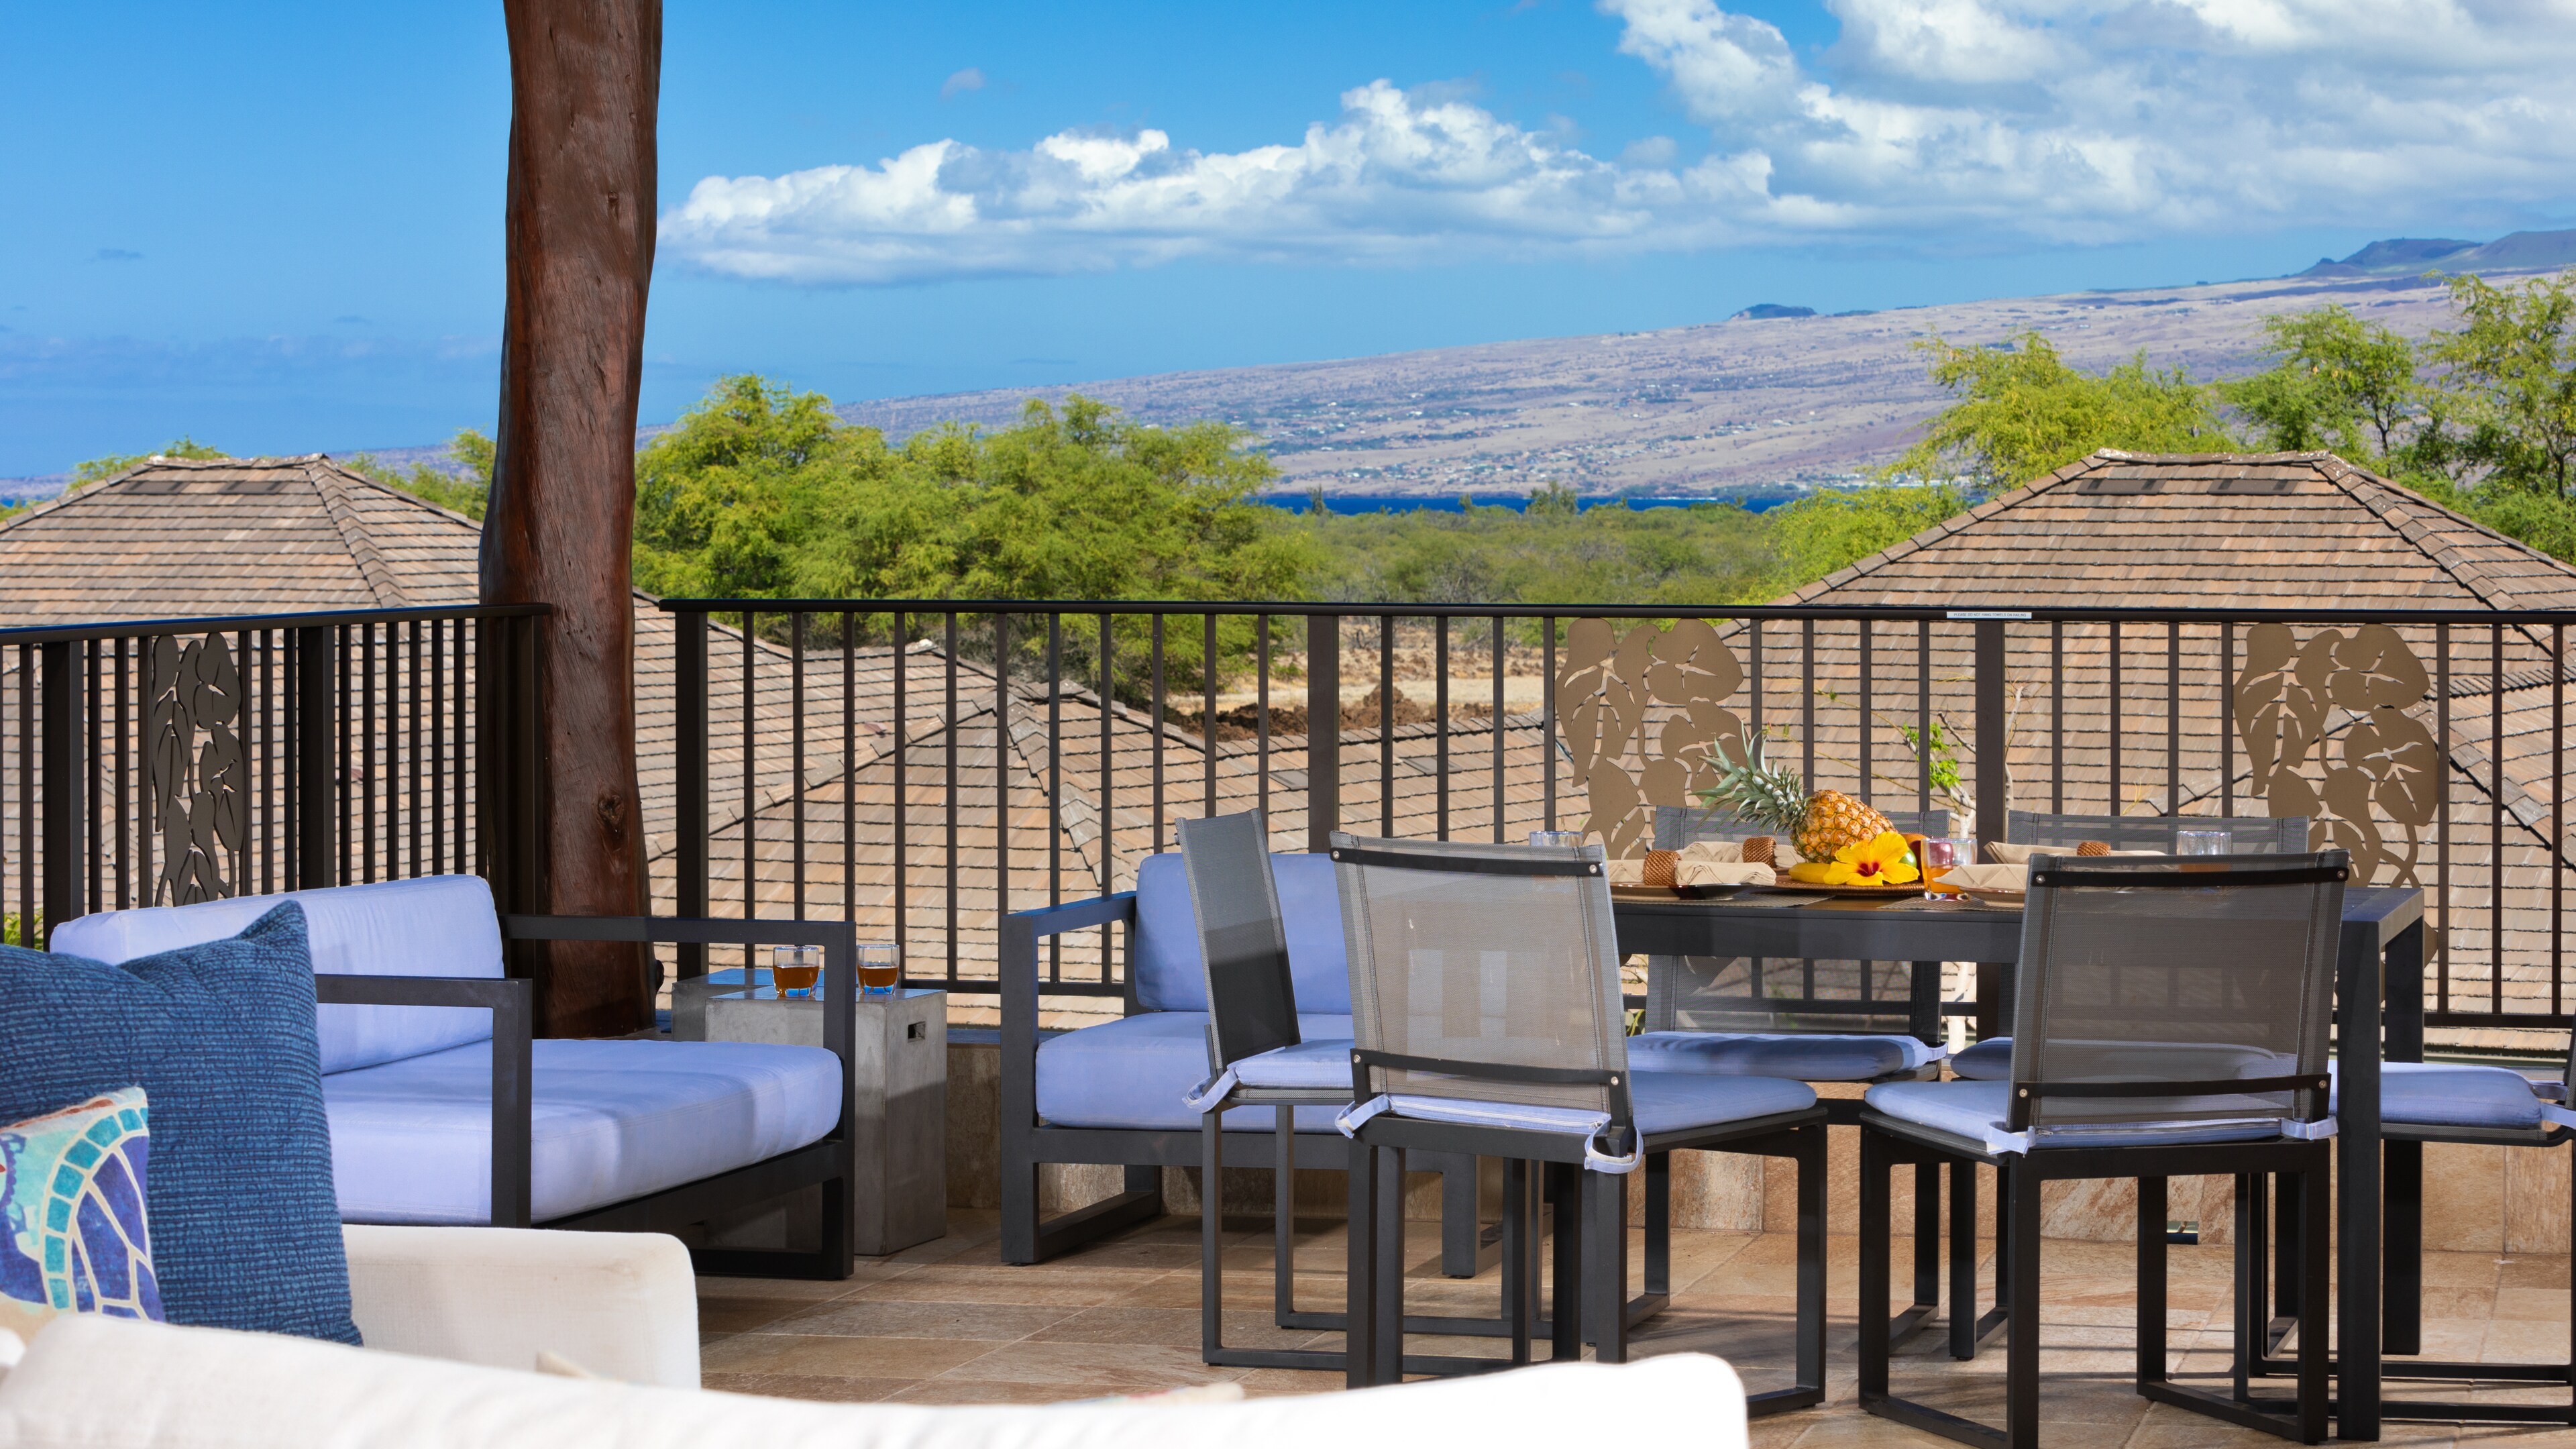 Welcome to Sand Castle Villa!
Gorgeous view of Kohala Mountain and peek-a-boo ocean views from the lanai